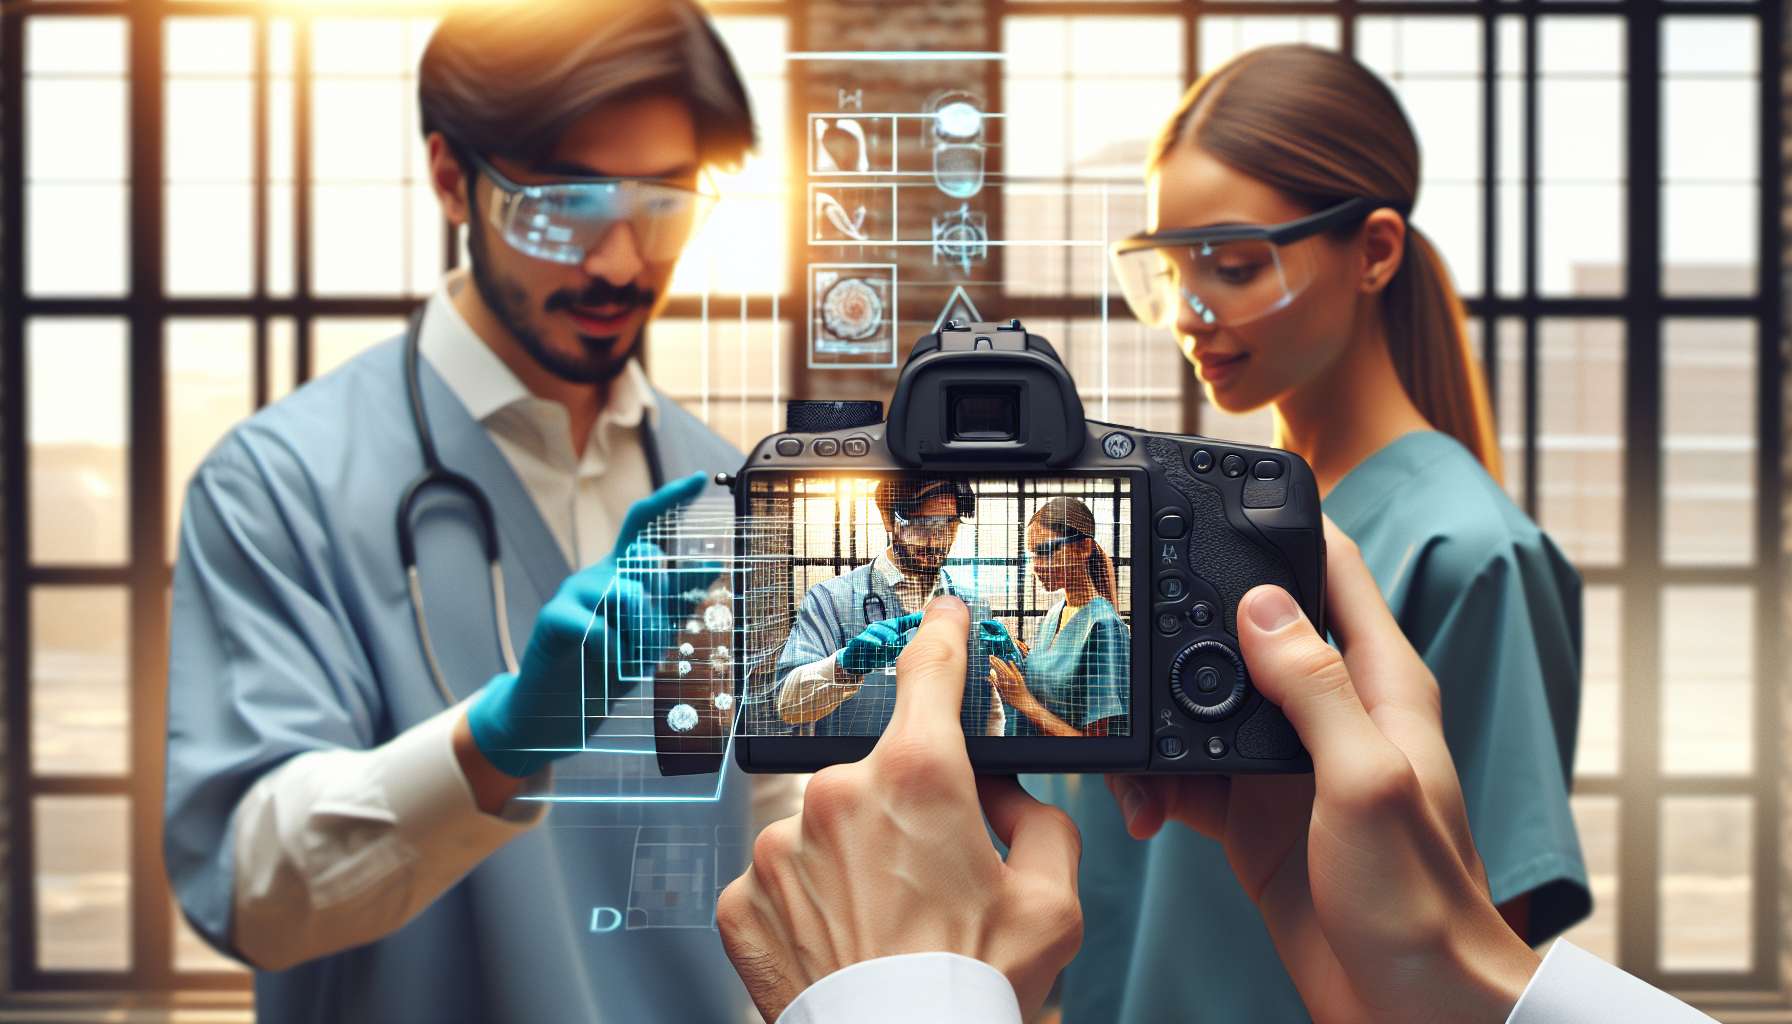 Why is AR becoming essential in medical device sales?